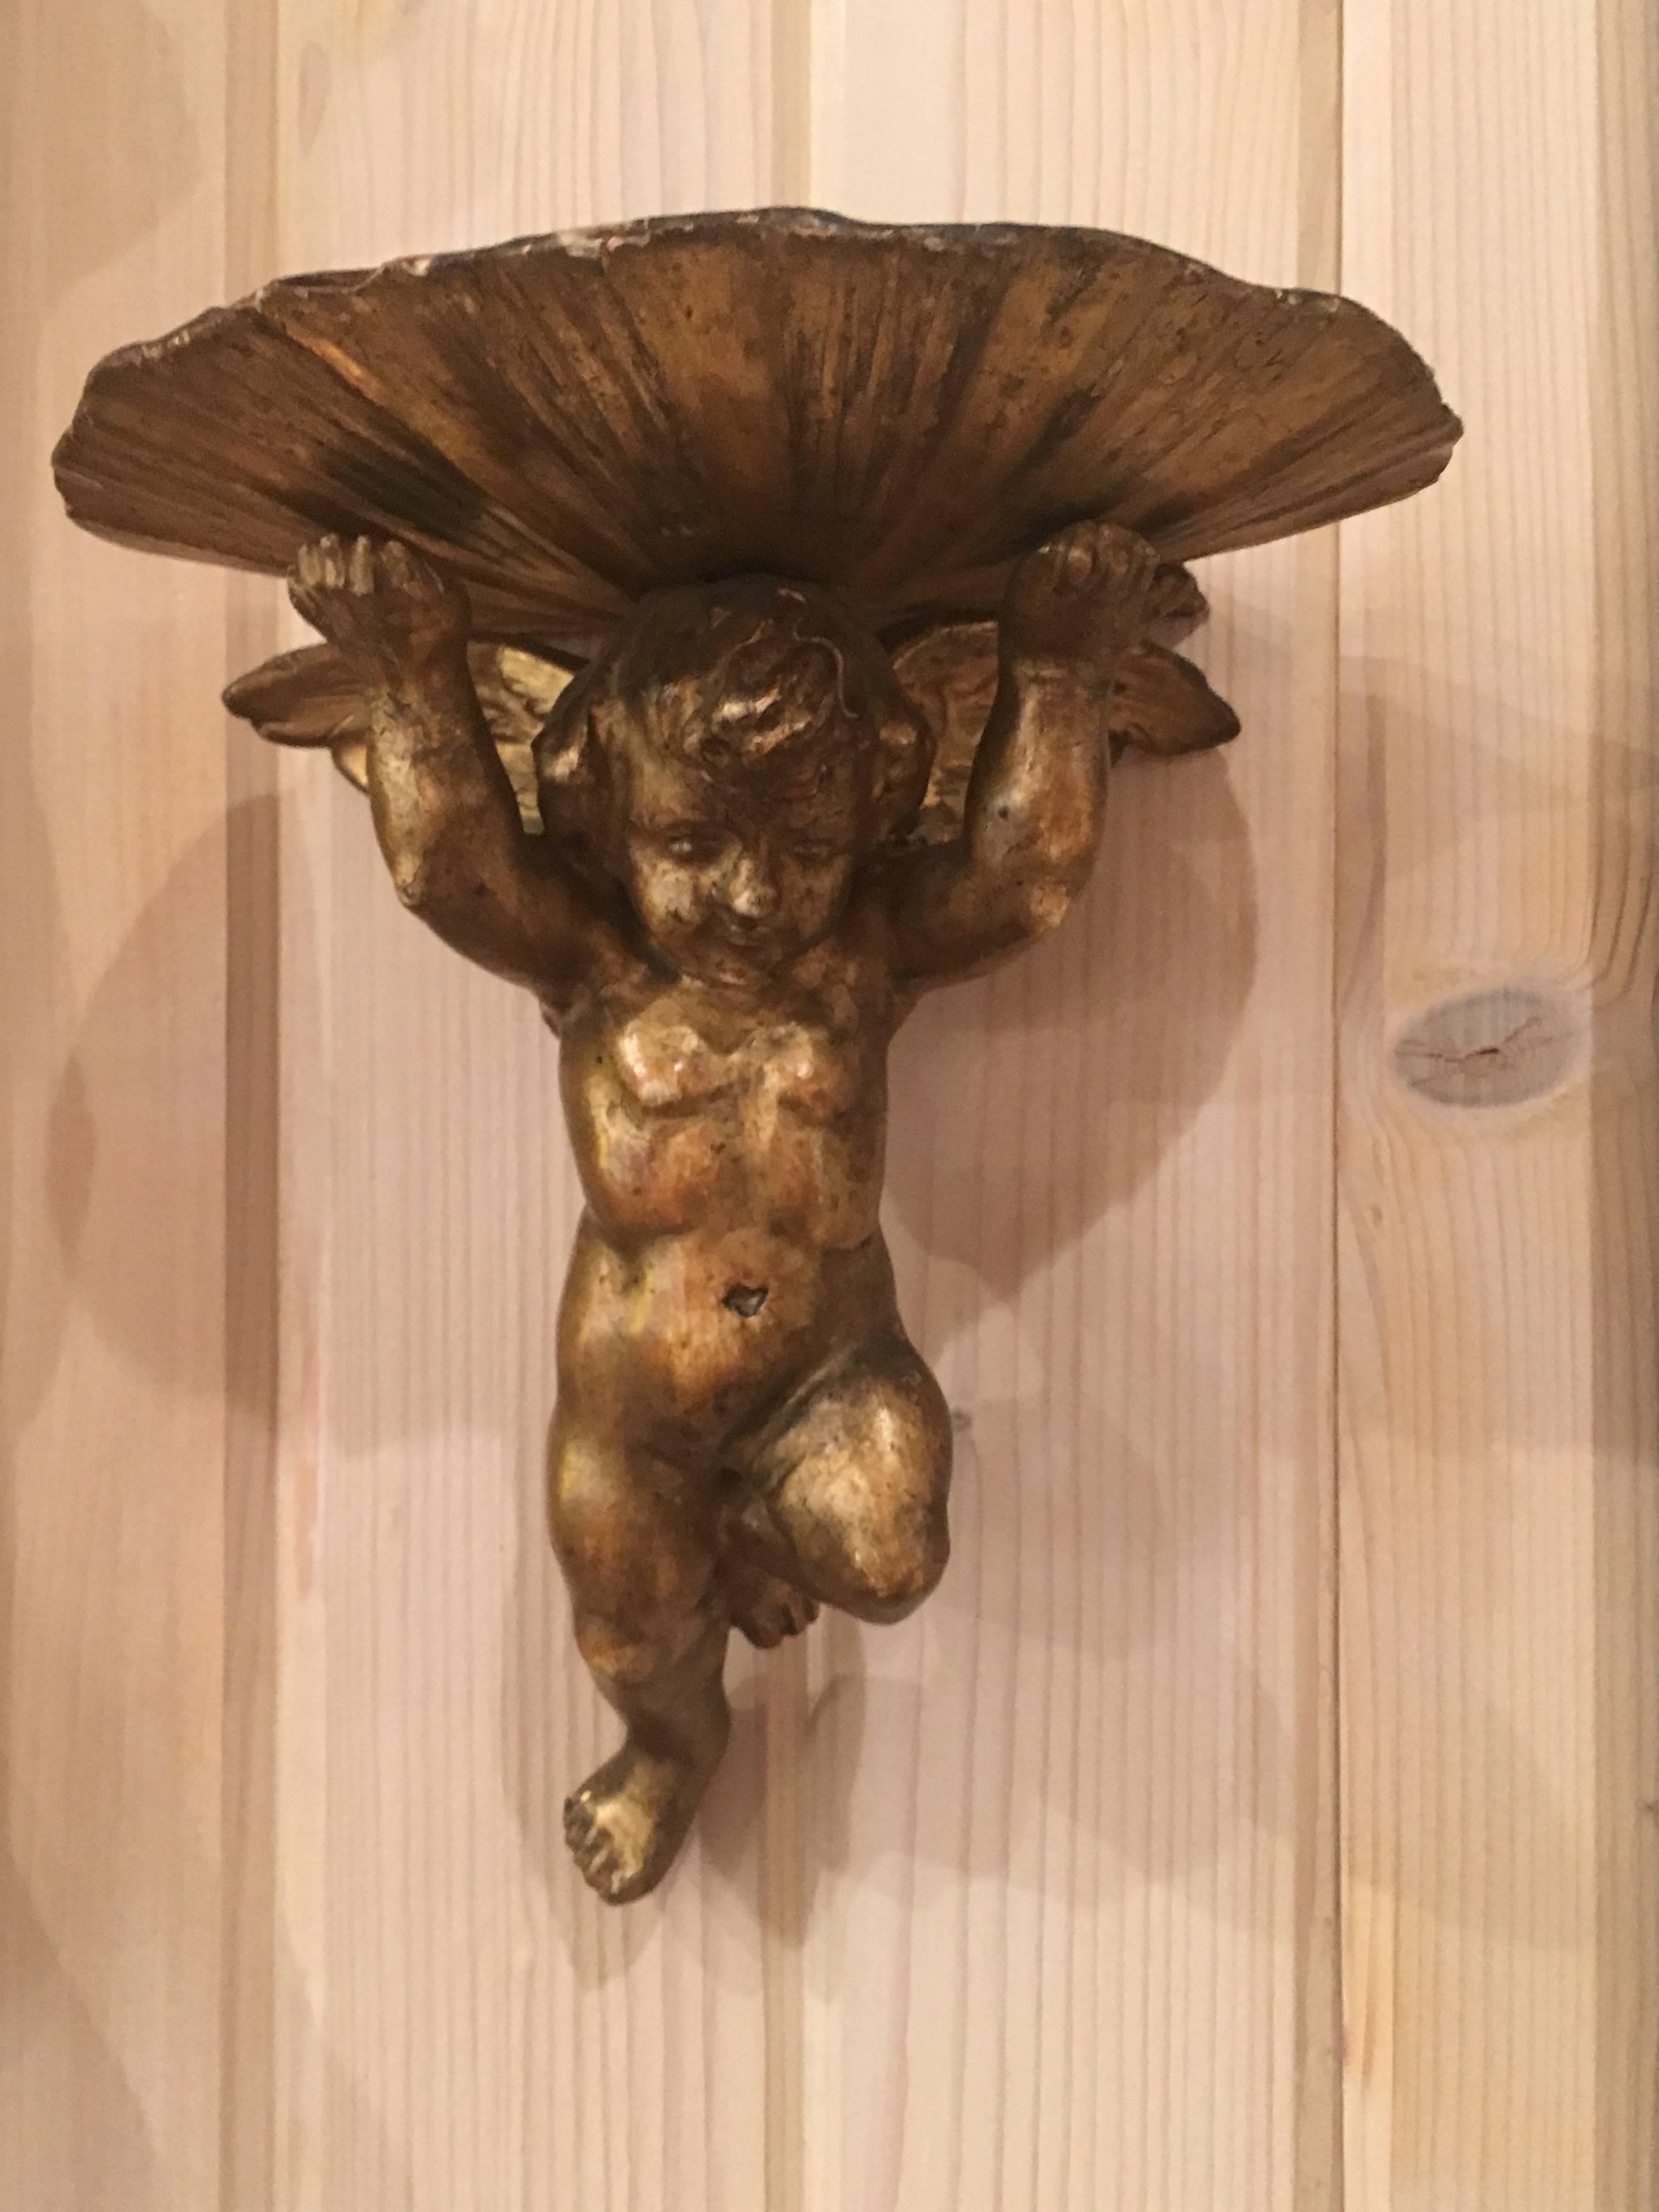 Charming pair of 19th century Italian giltwood brackets, putti supporting shell shelf. Great color, patination. Confirm measurements.